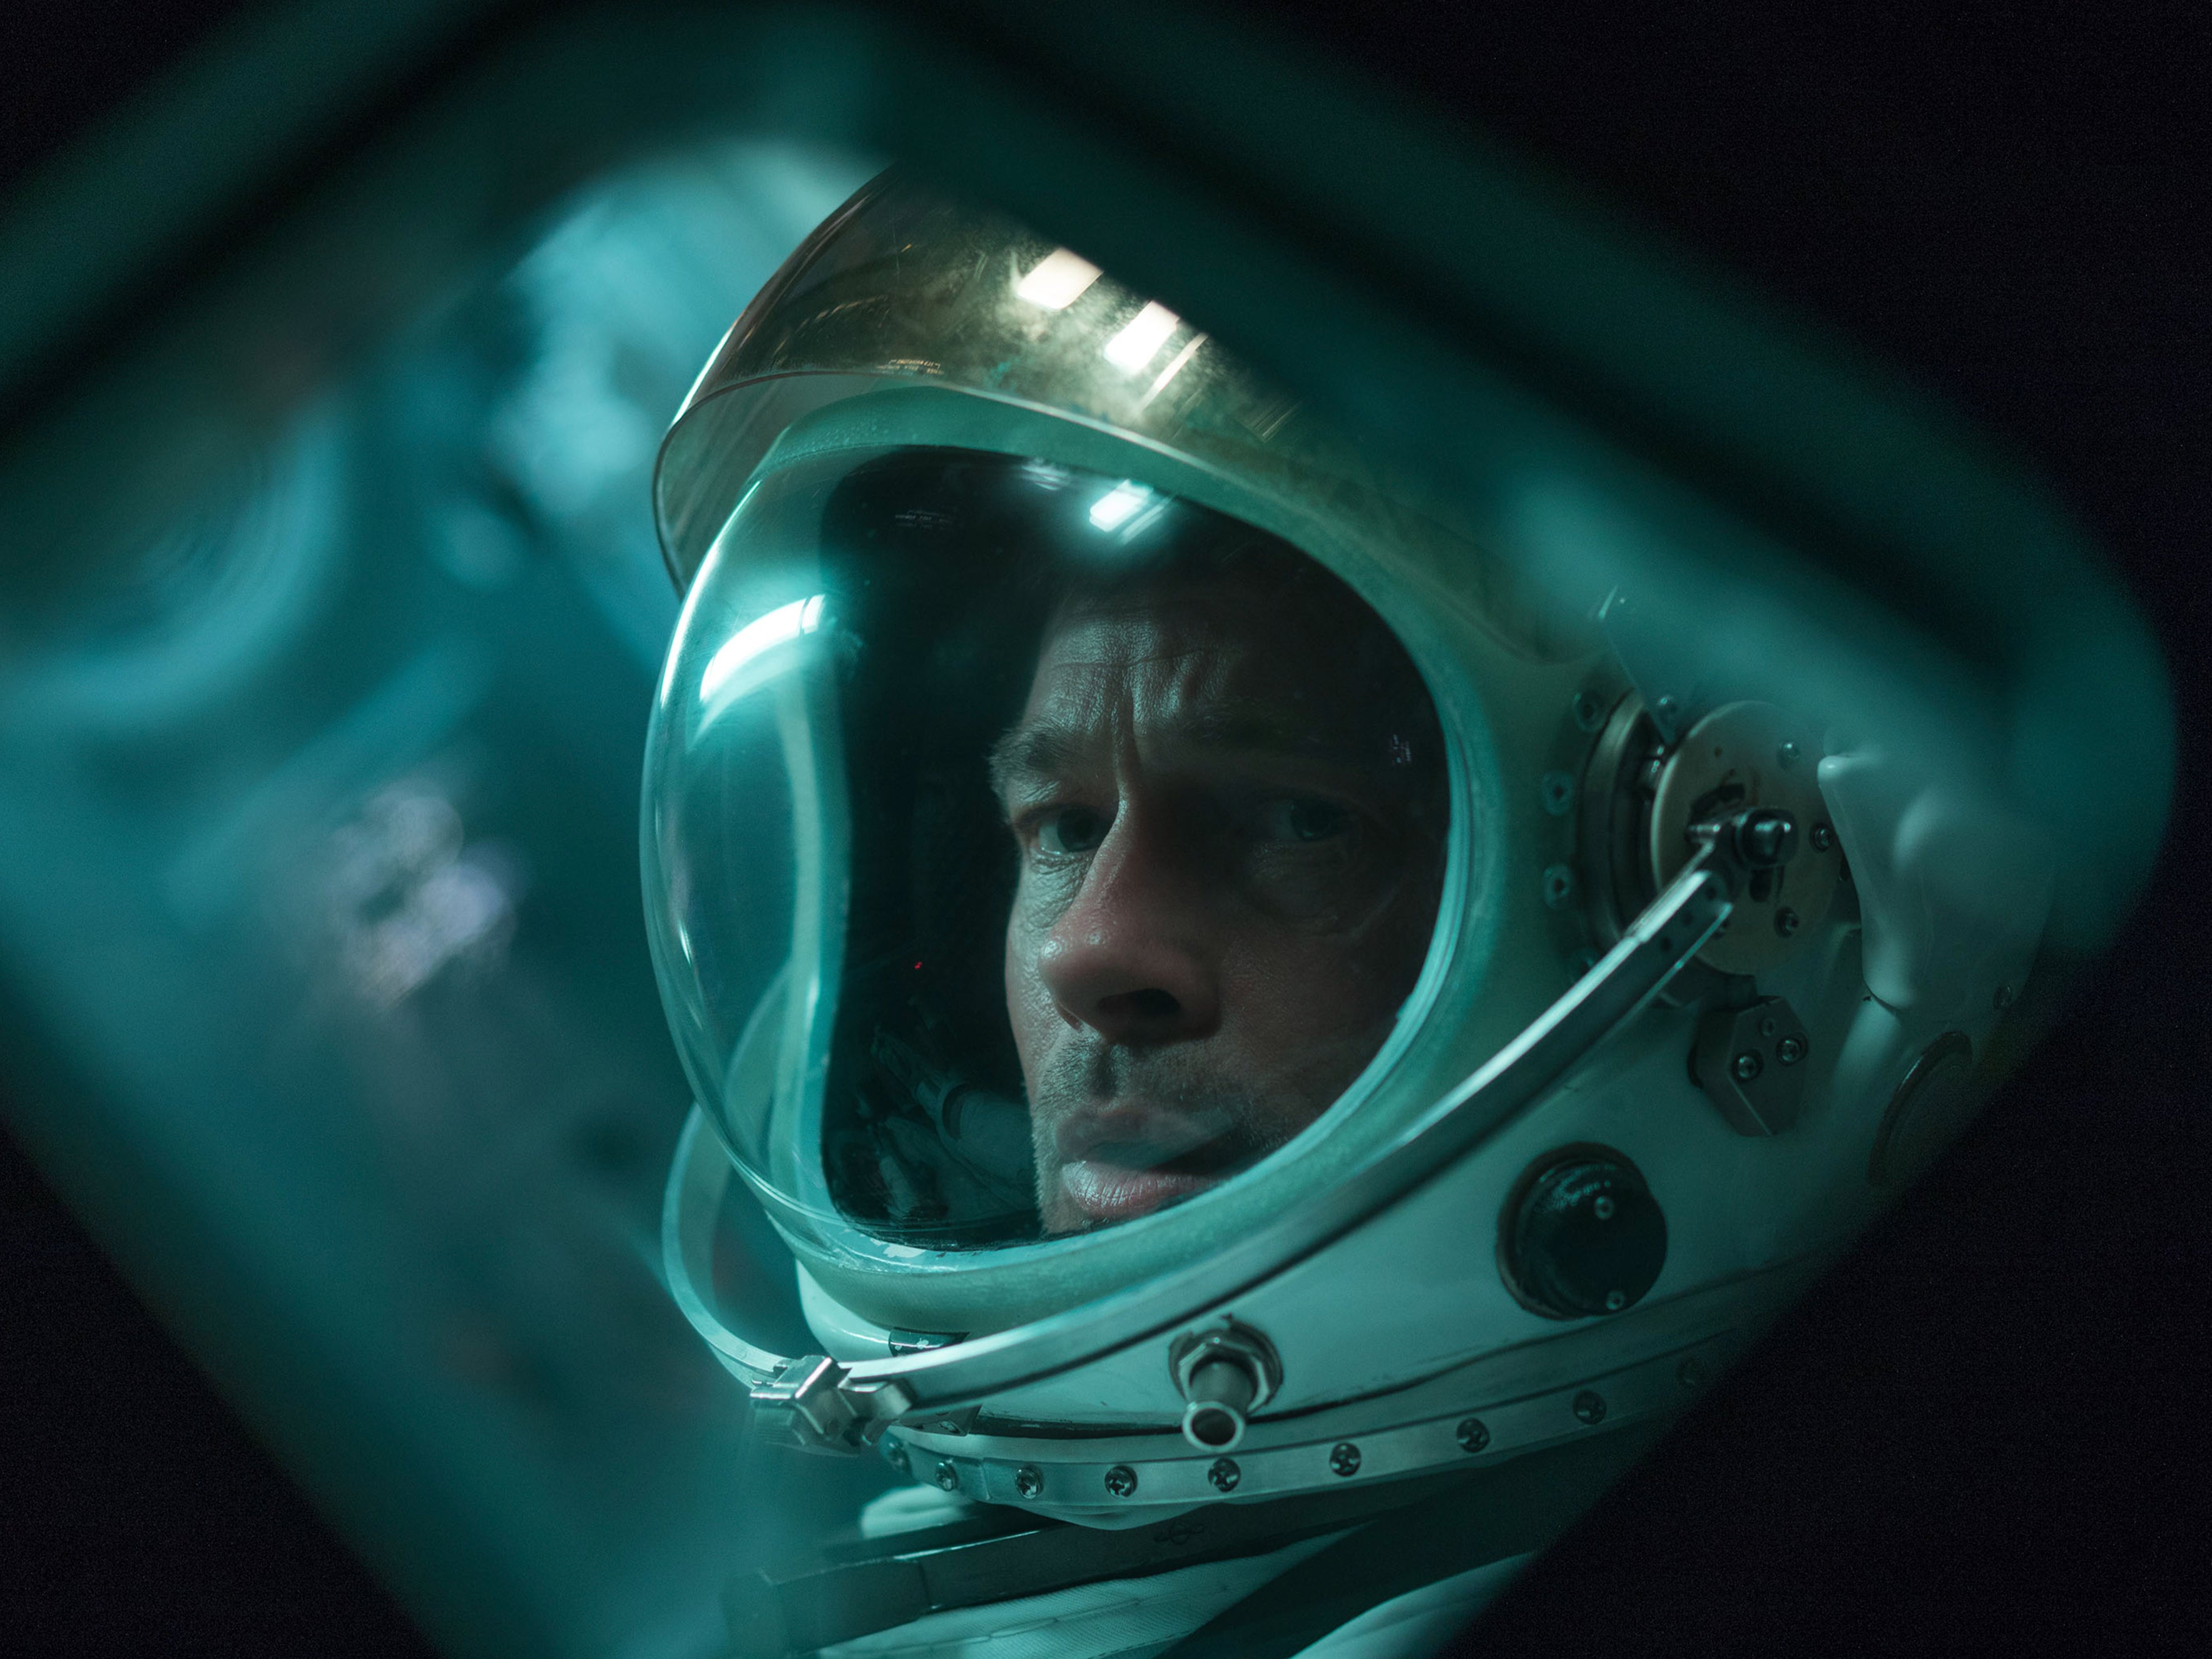 Brad Pitt as Roy McBride in the space thriller ‘Ad Astra'